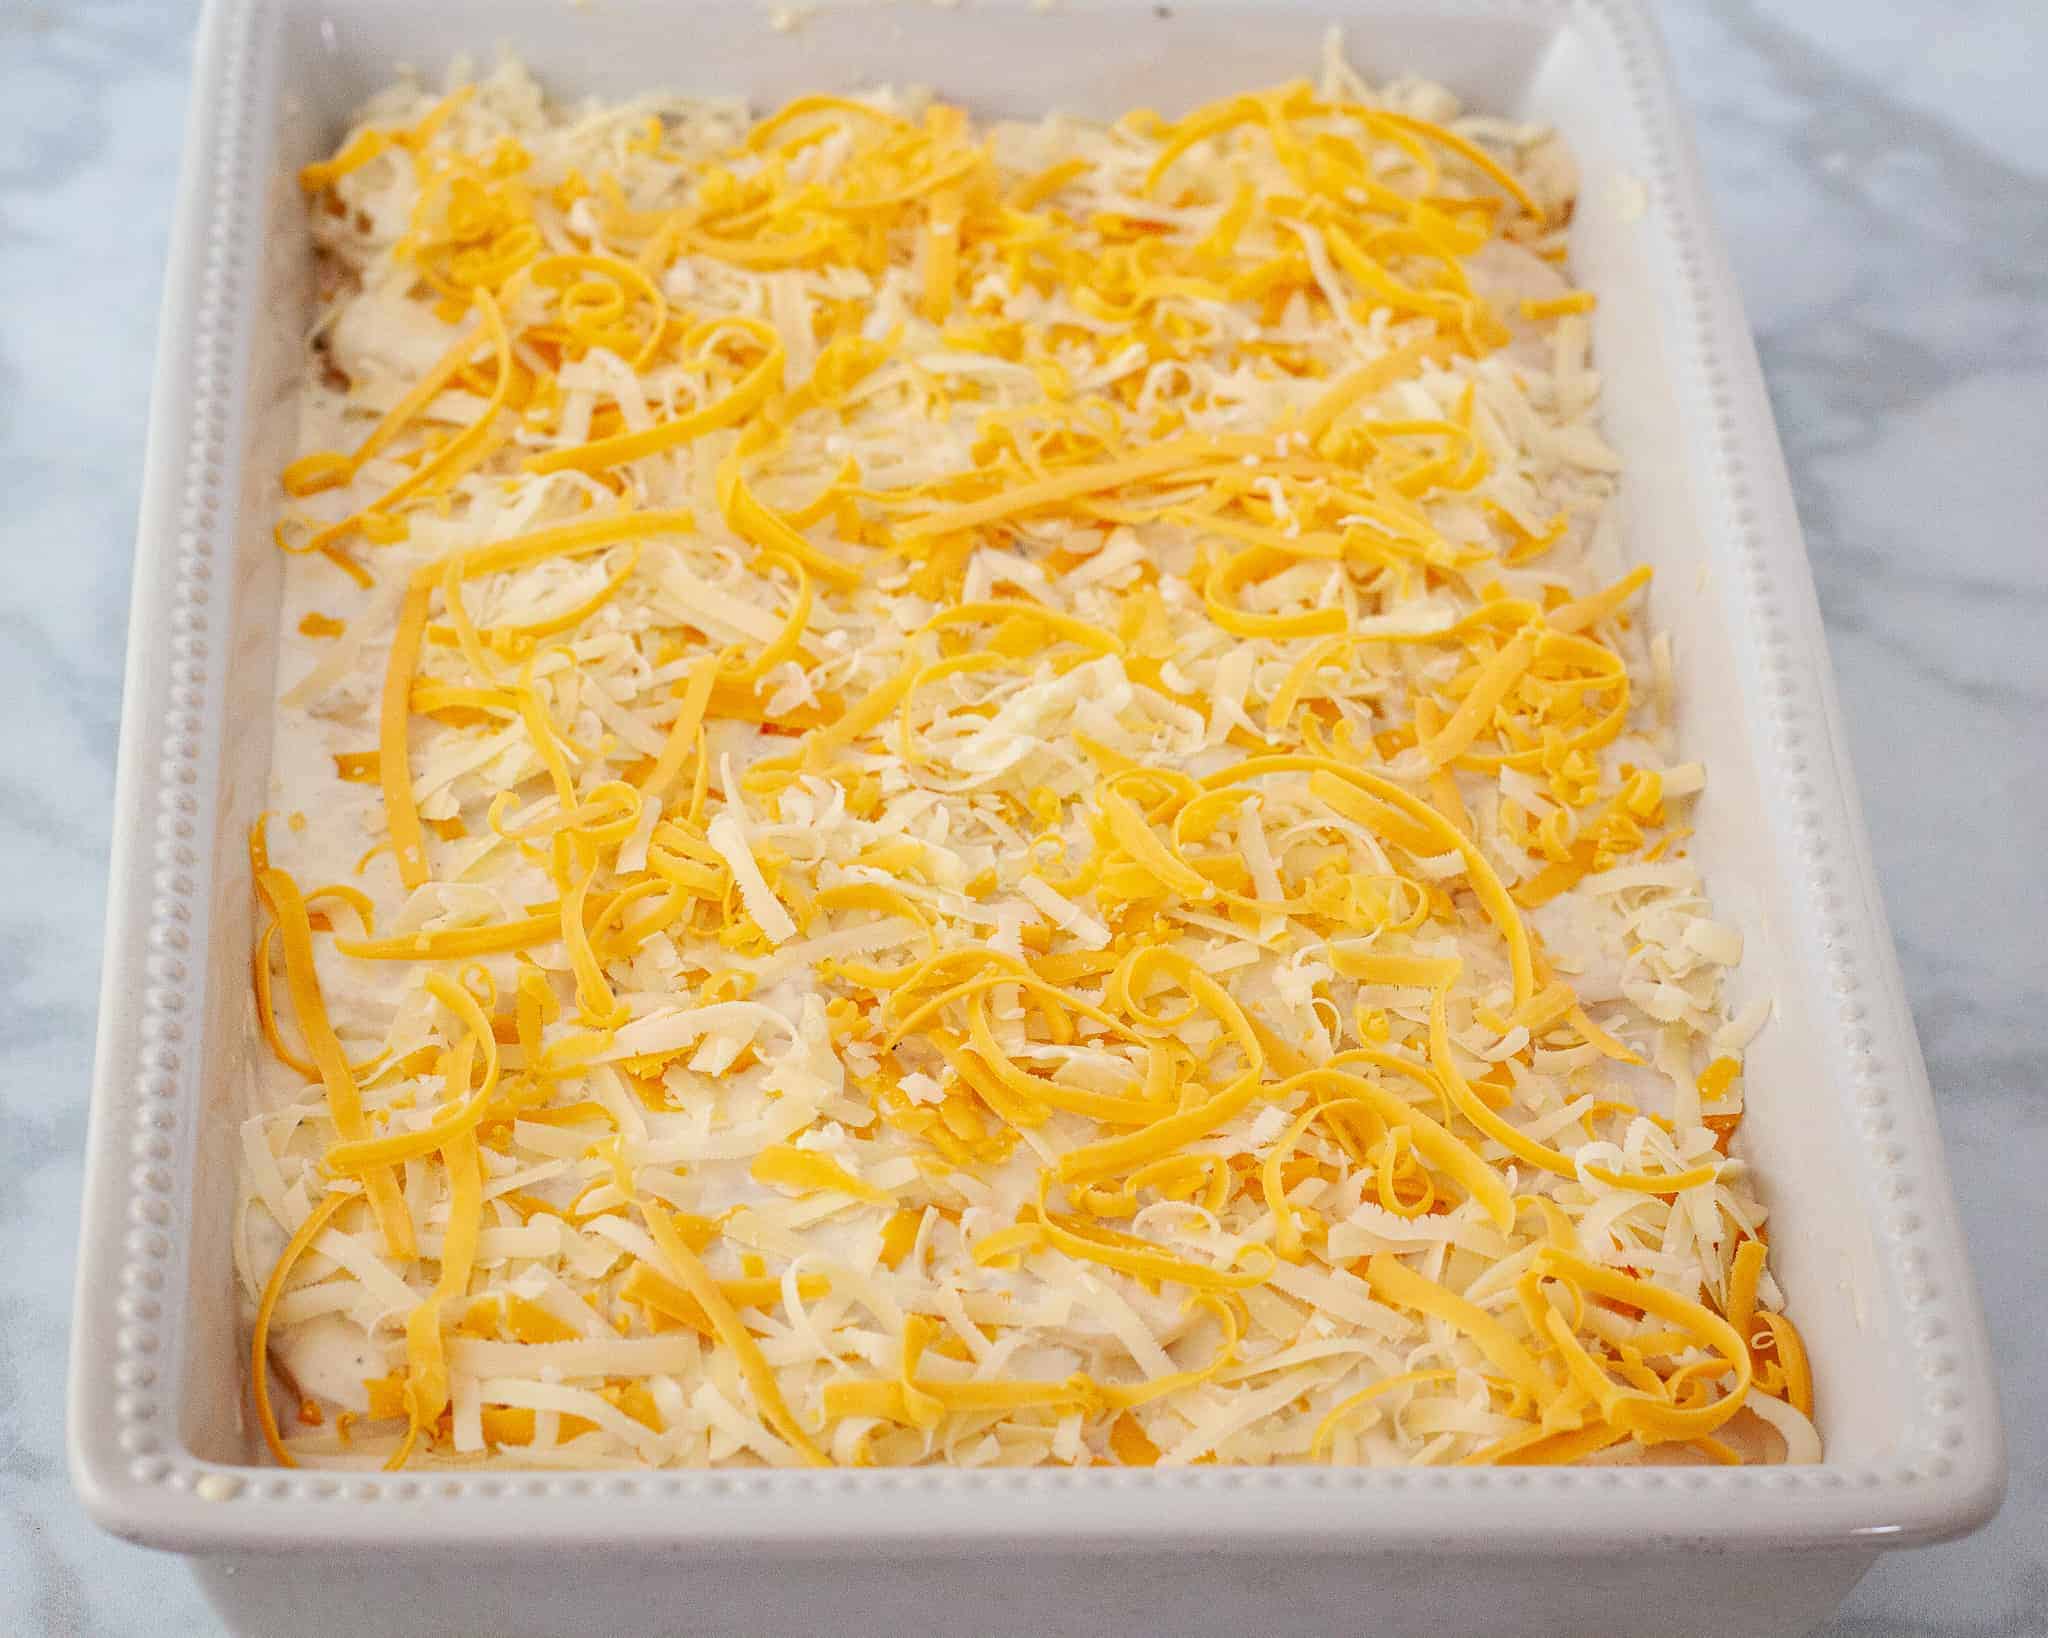 The assembled scalloped potatoes are shown in a baking dish topped with shredded cheese.